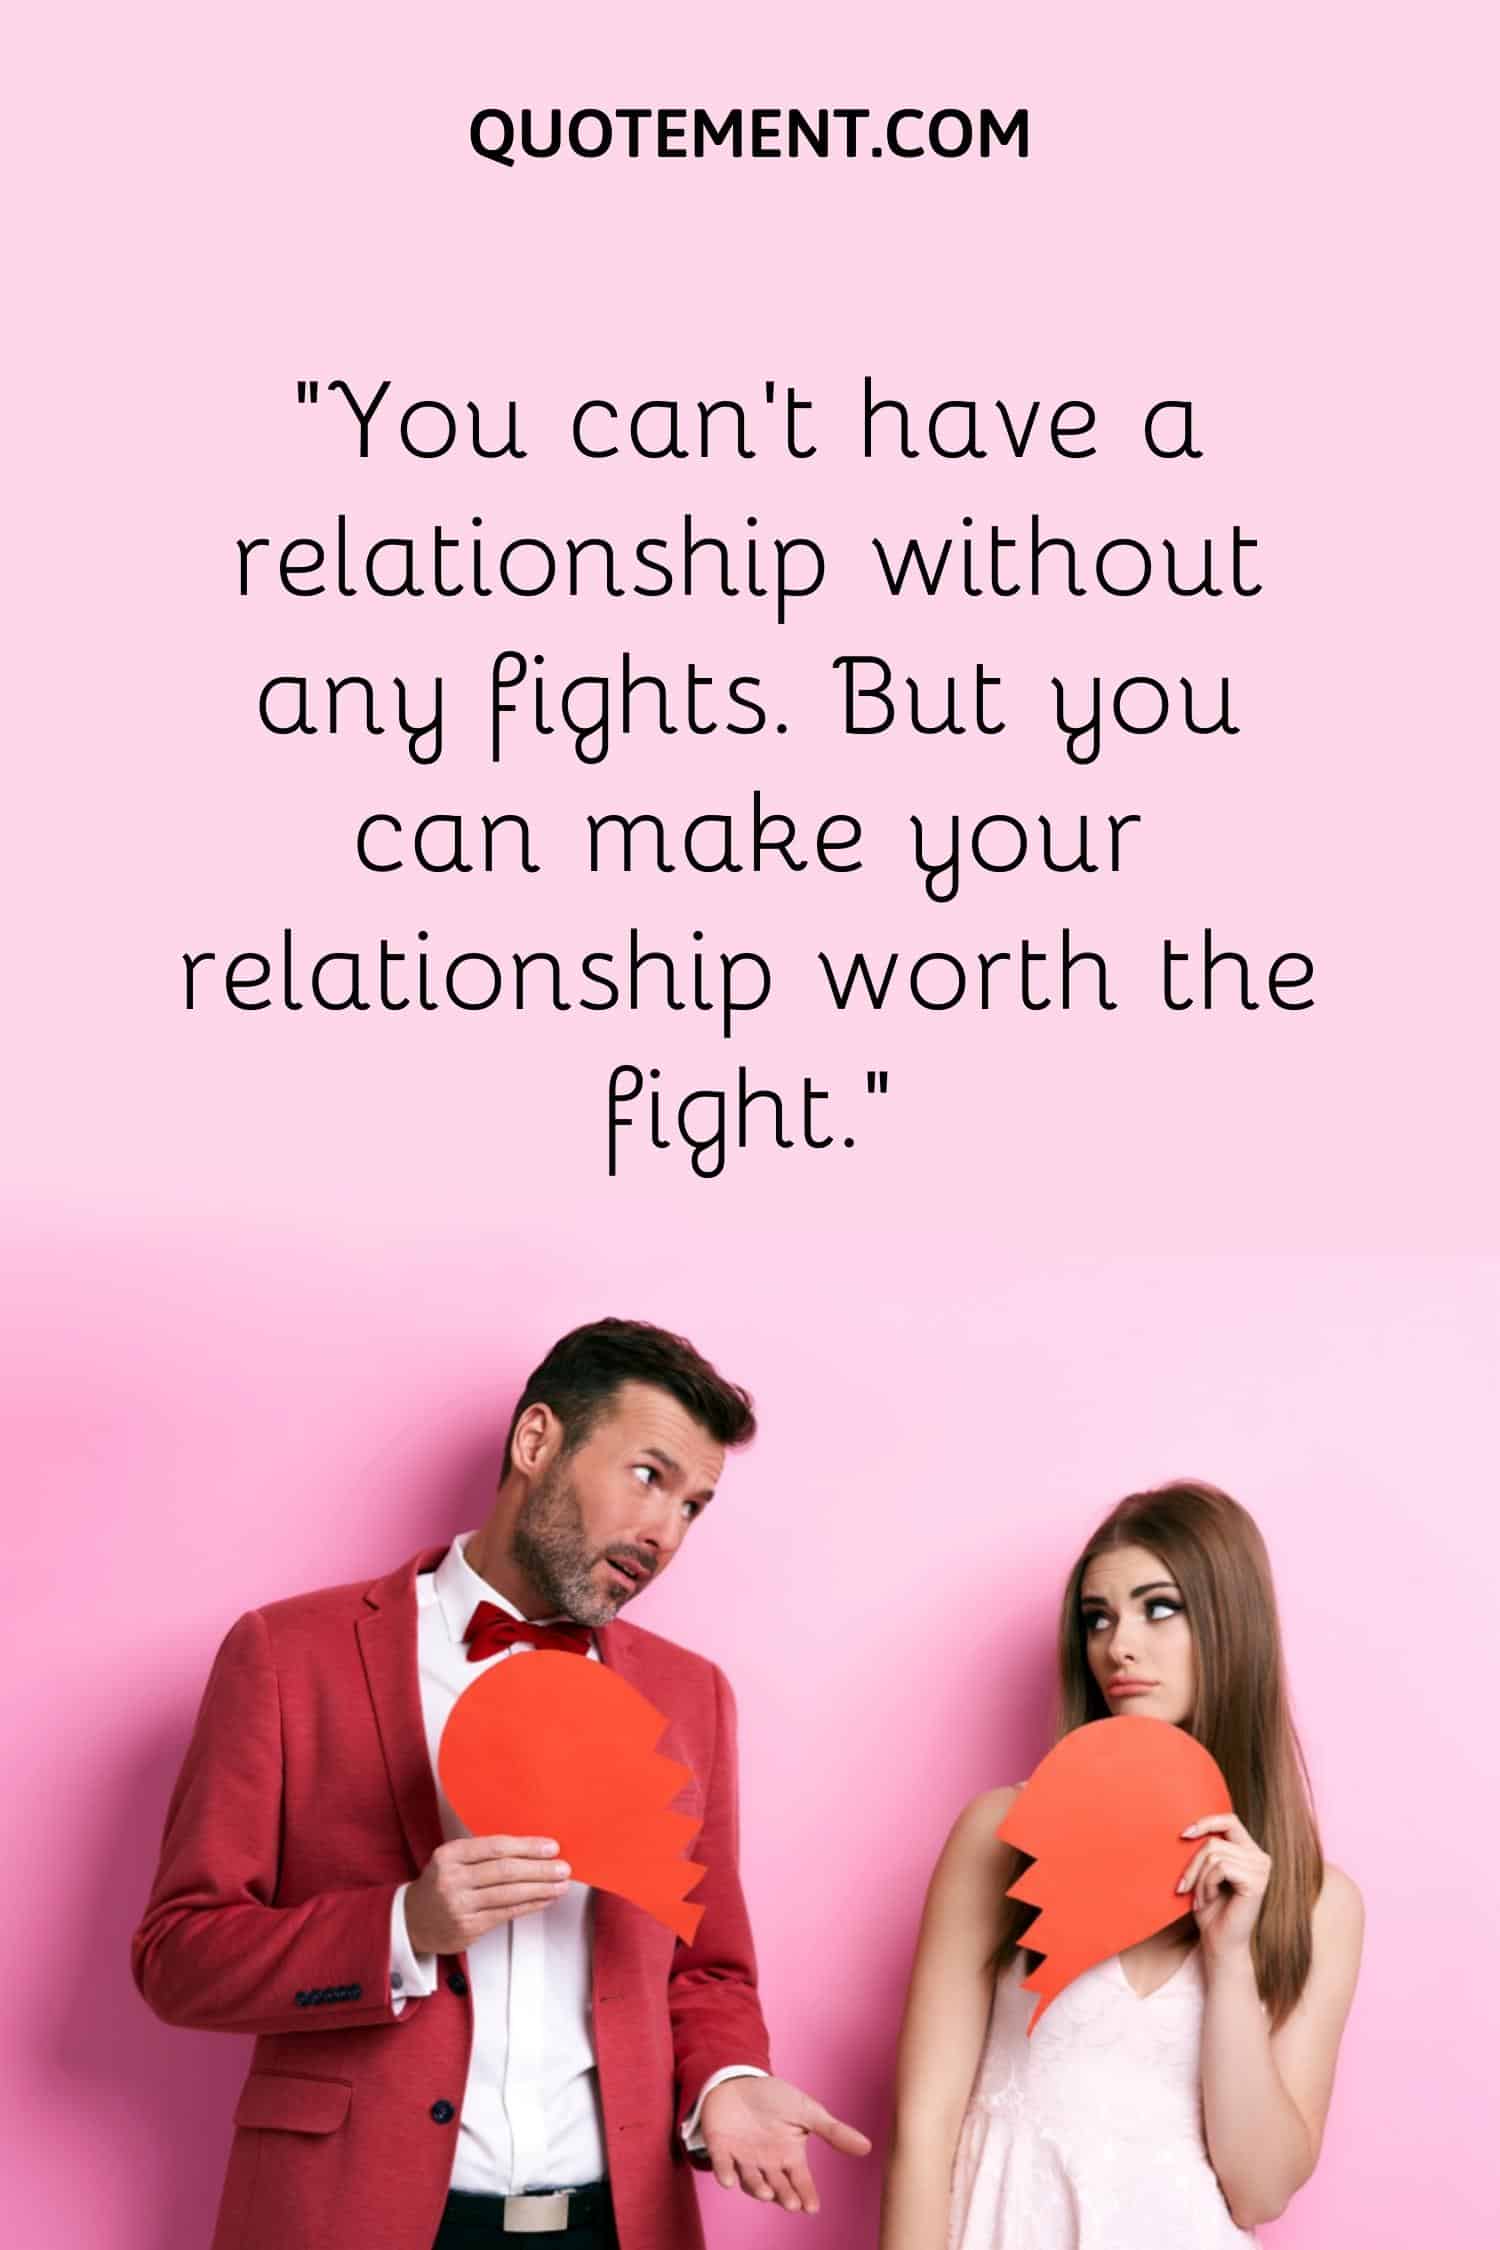 “You can’t have a relationship without any fights. But you can make your relationship worth the fight.”